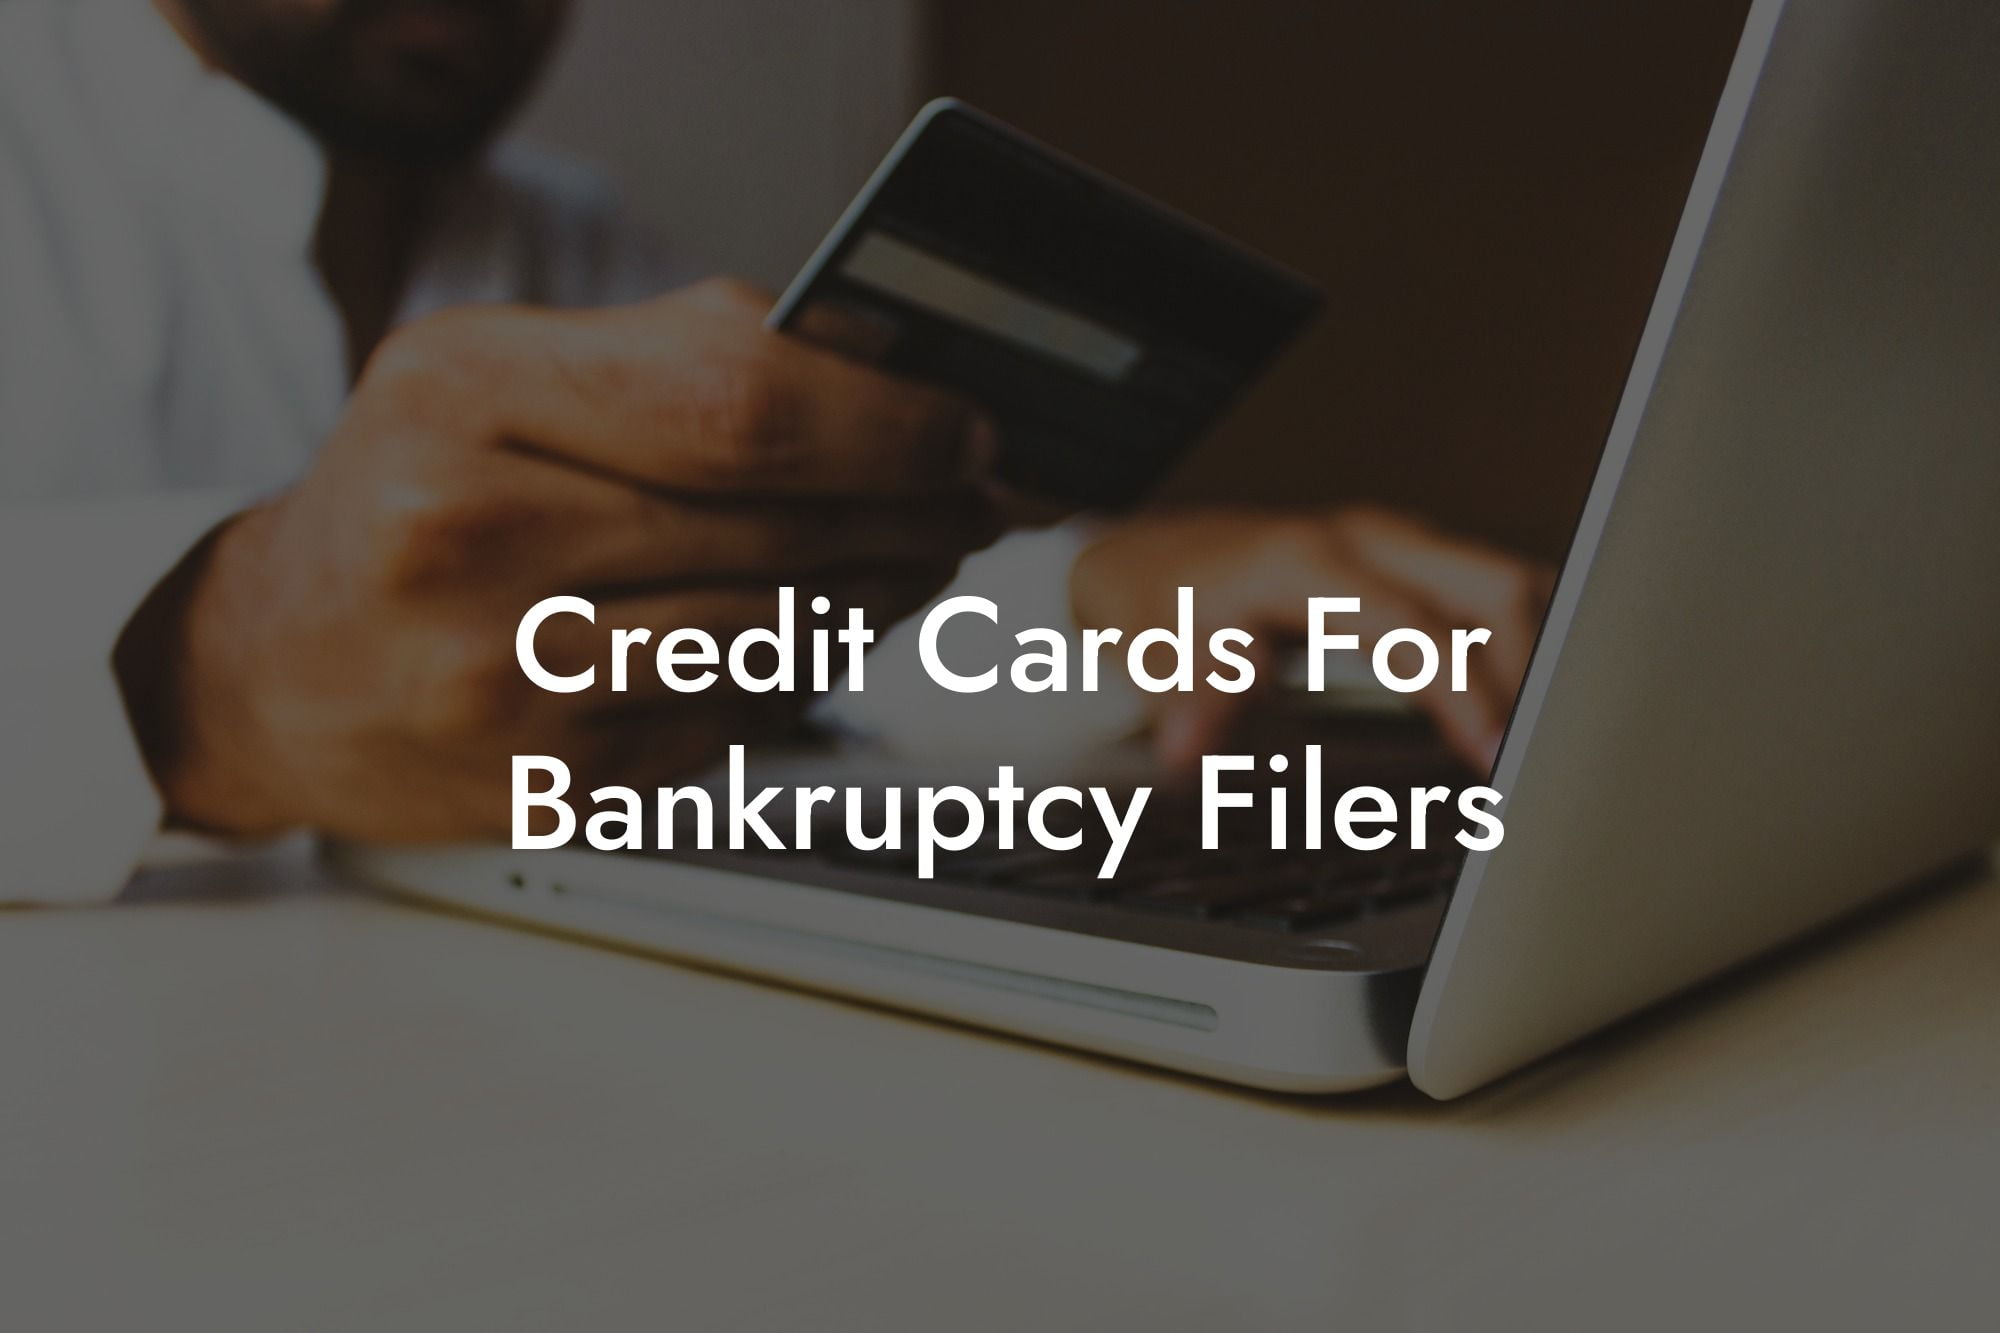 Credit Cards For Bankruptcy Filers